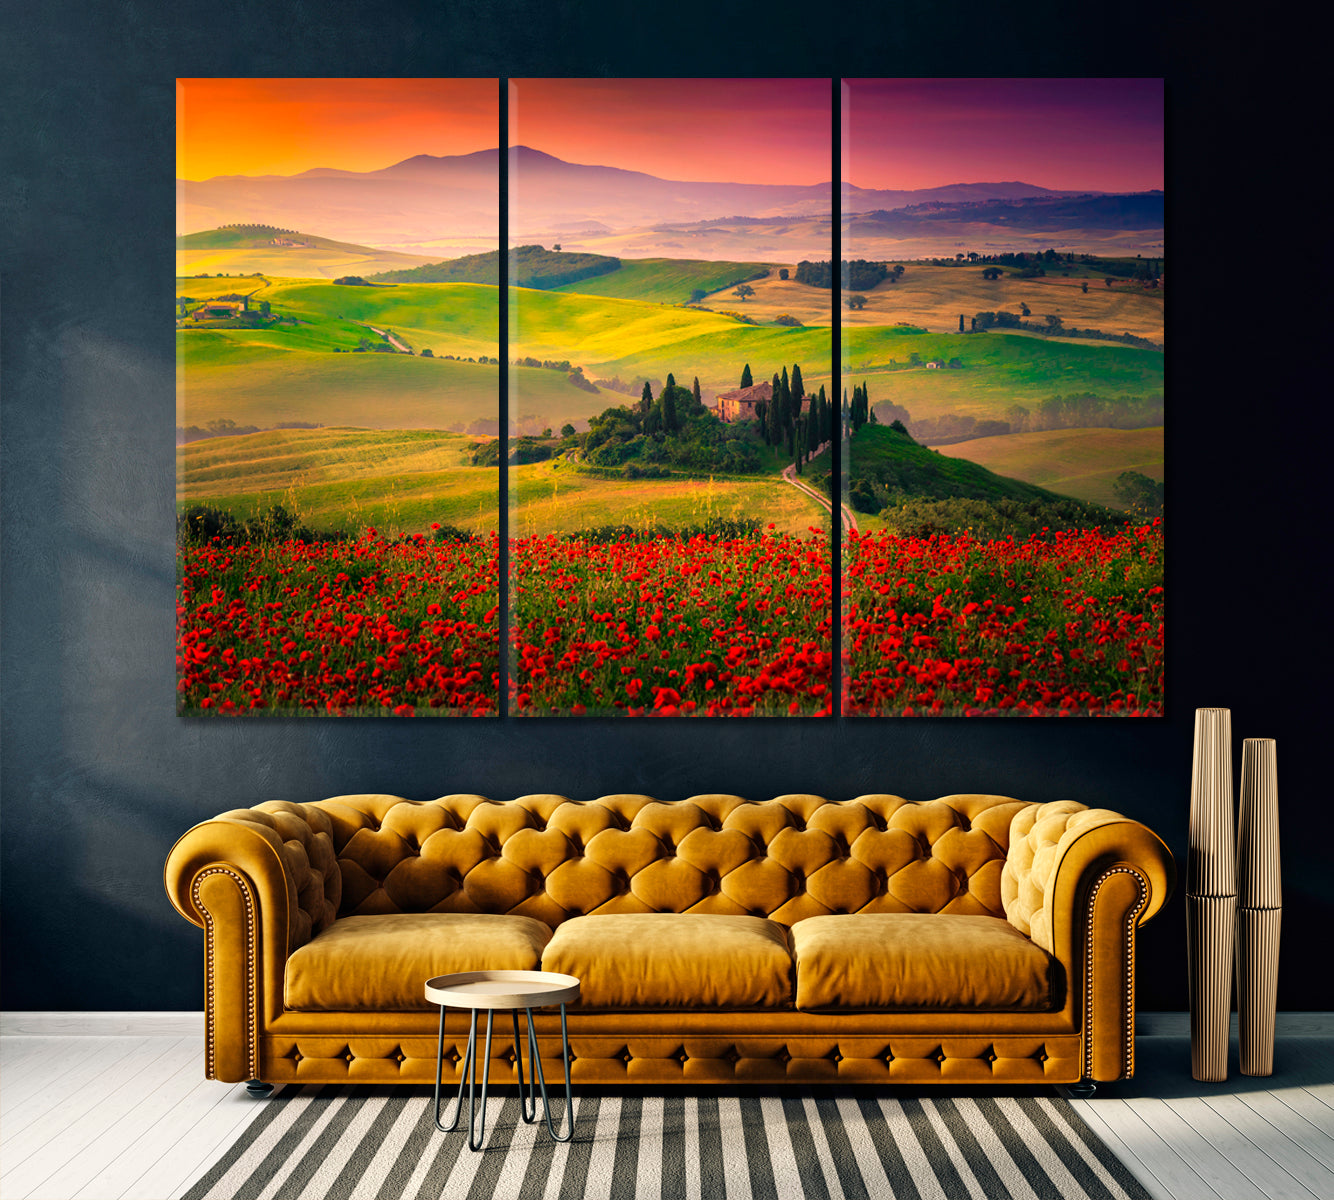 Tuscany Landscape with Poppy Field Canvas Print ArtLexy 3 Panels 36"x24" inches 